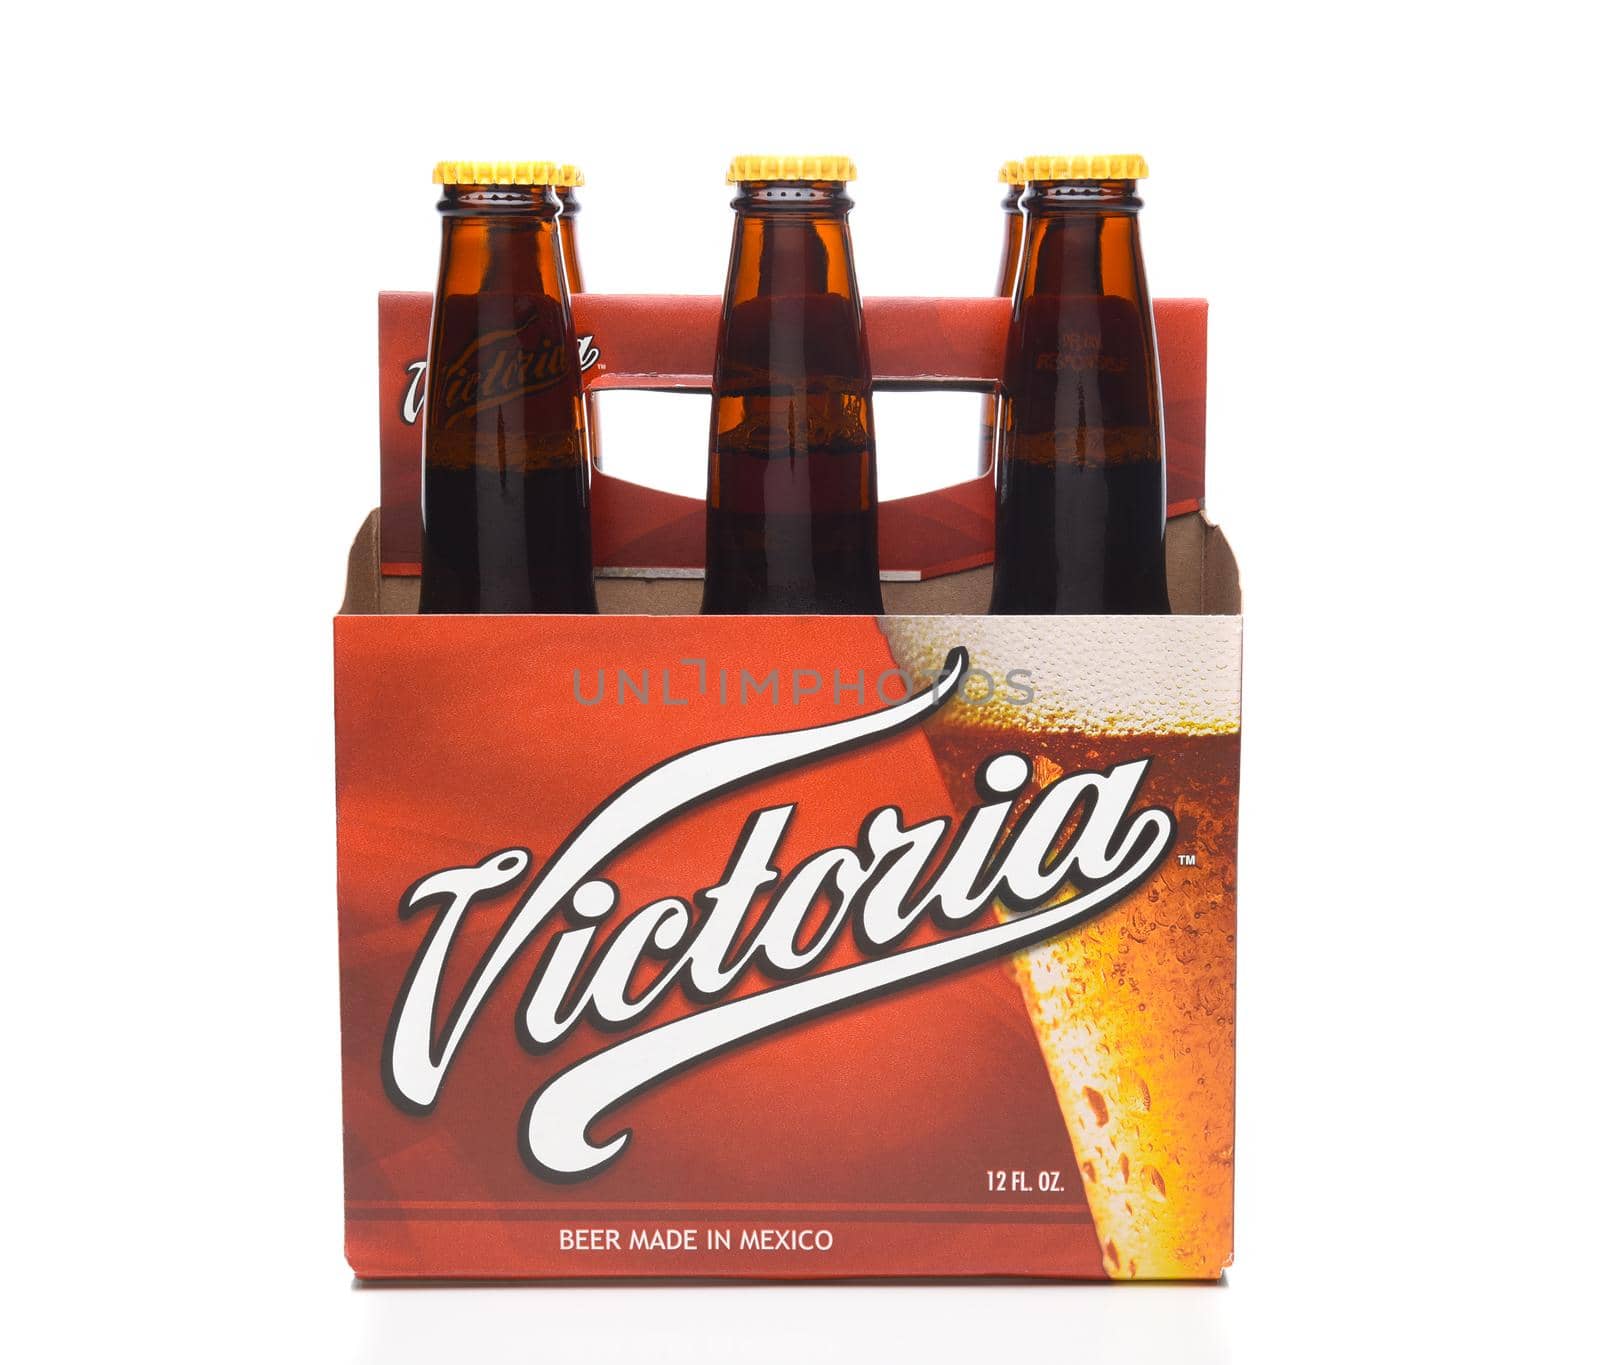 IRVINE, CALIFORNIA - DECEMBER 14, 2017: 6 pack of Victoria Beer Bottles side view. Mexicos oldest beer brand. Victoria has been brewed consistently as a Vienna style lager for 145 years. 